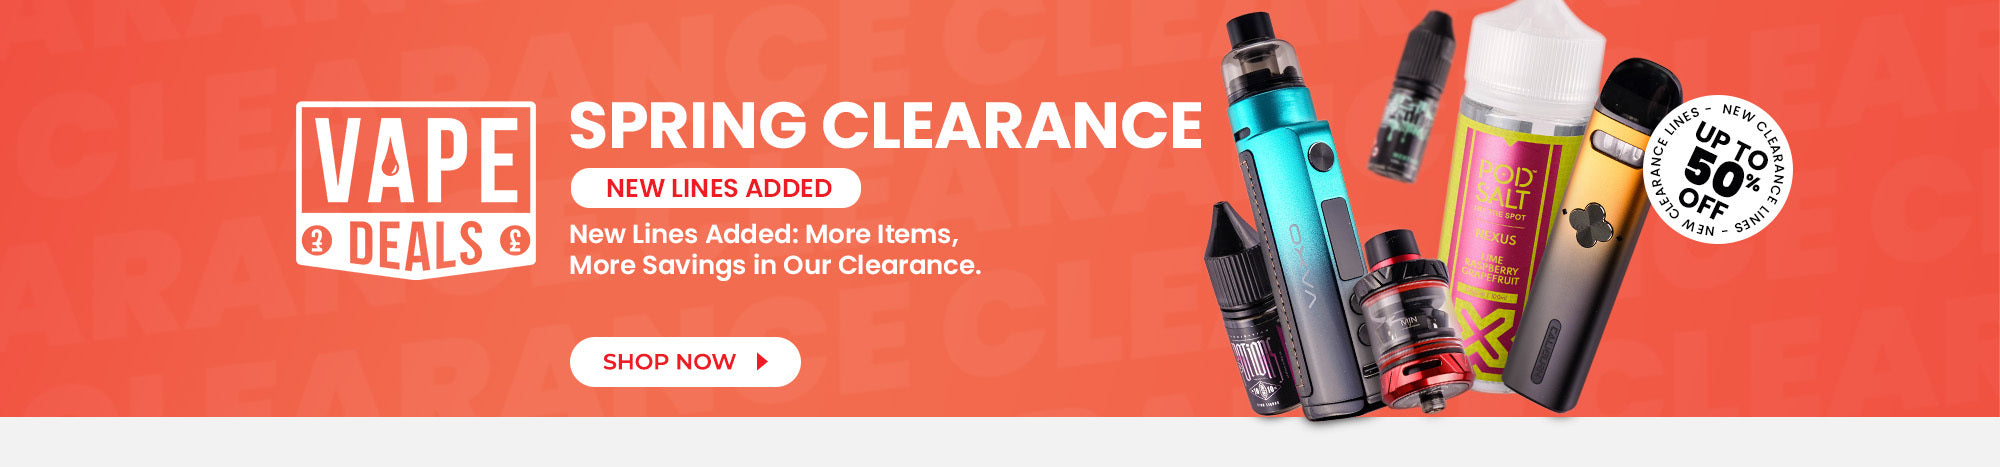 New Lines Added to Clearance - Shop Now